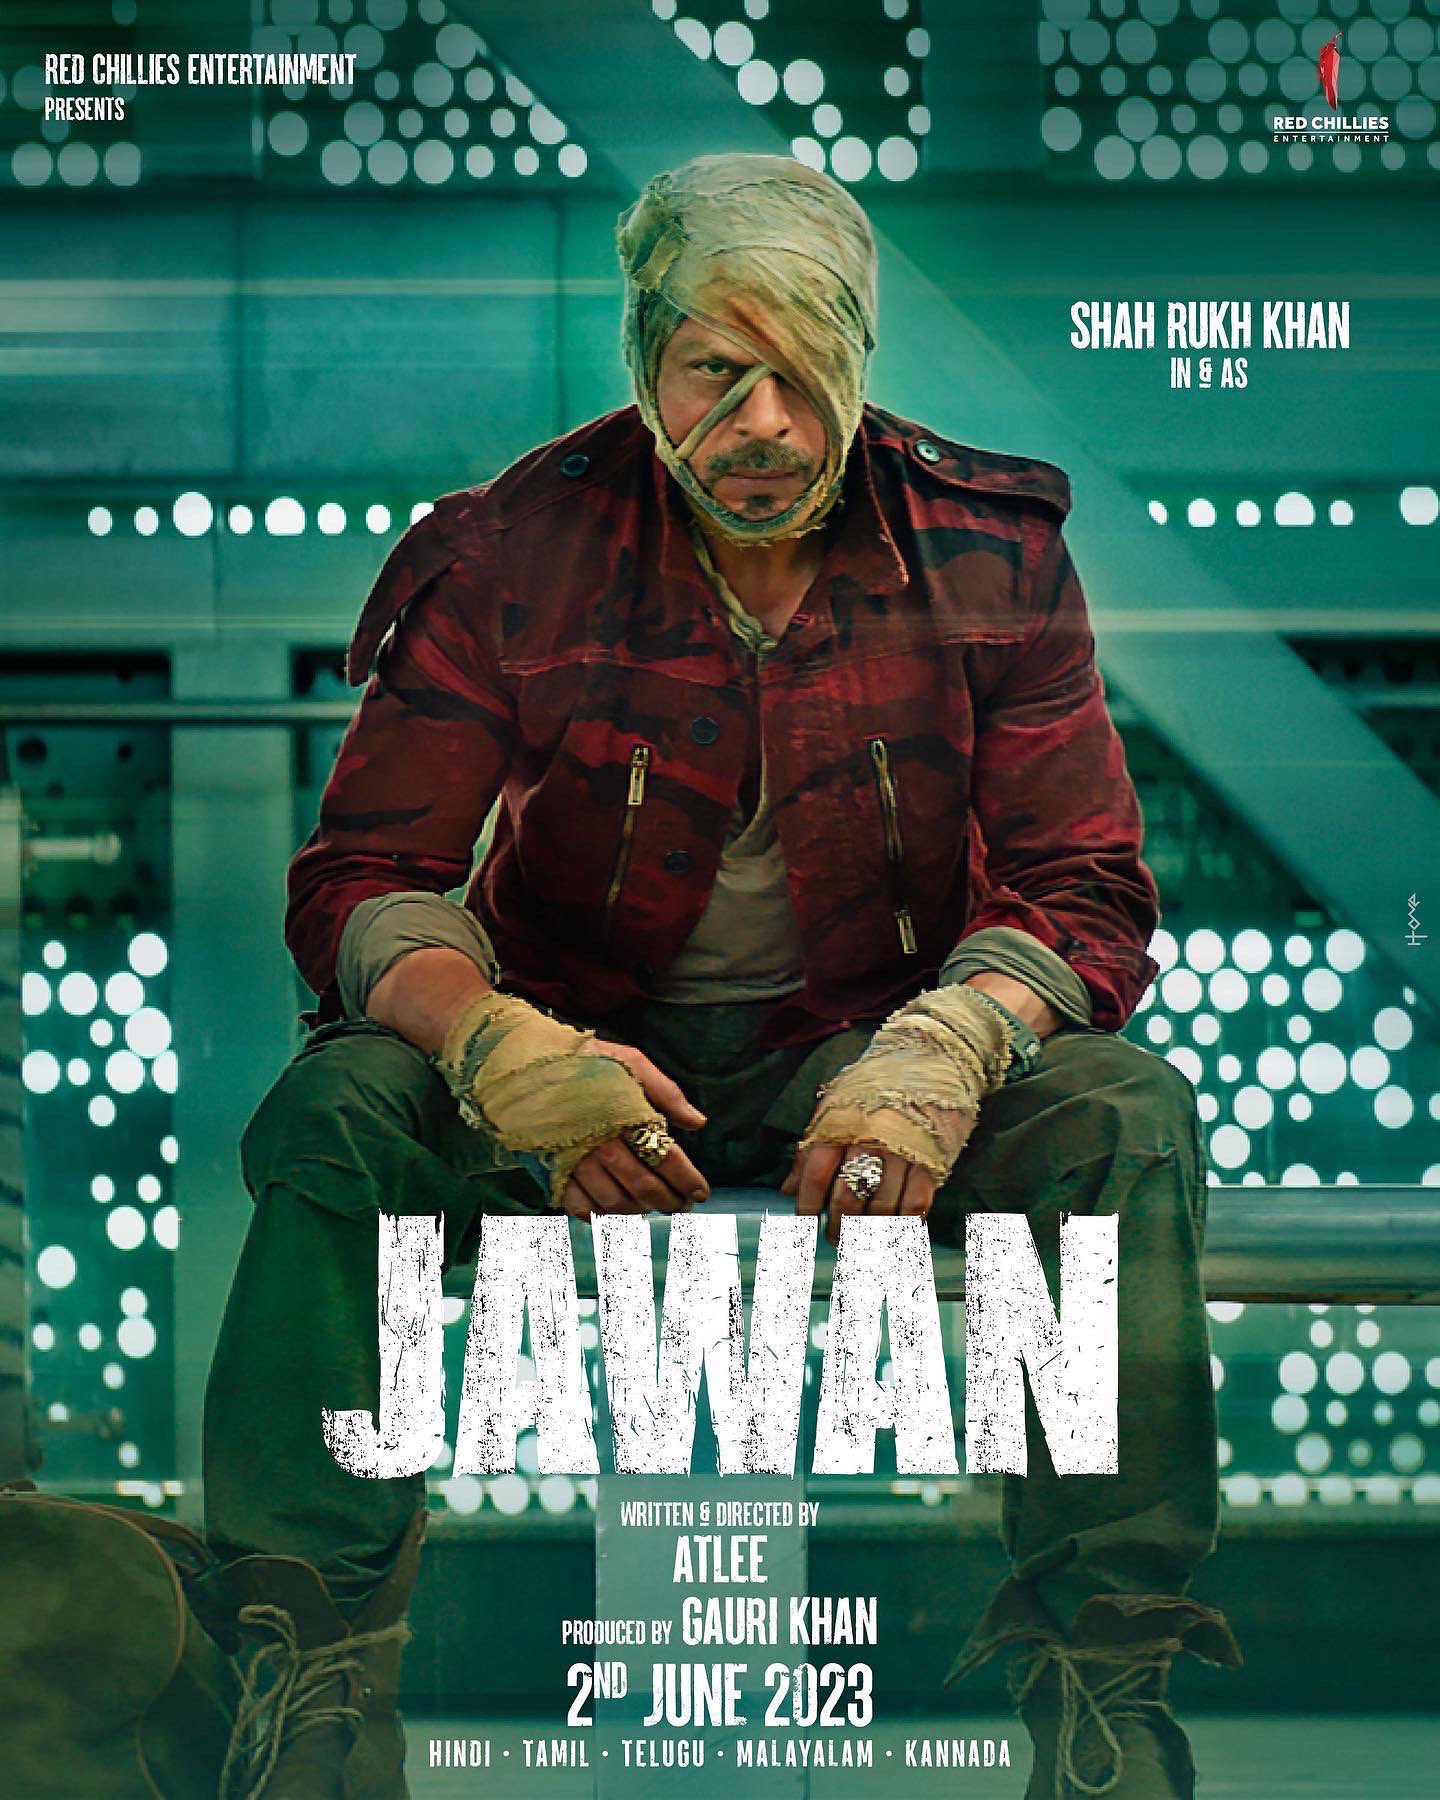 Pakistani audiences now have the opportunity to stream the extended edition of Shah Rukh Khan's 'Jawan' on Netflix.